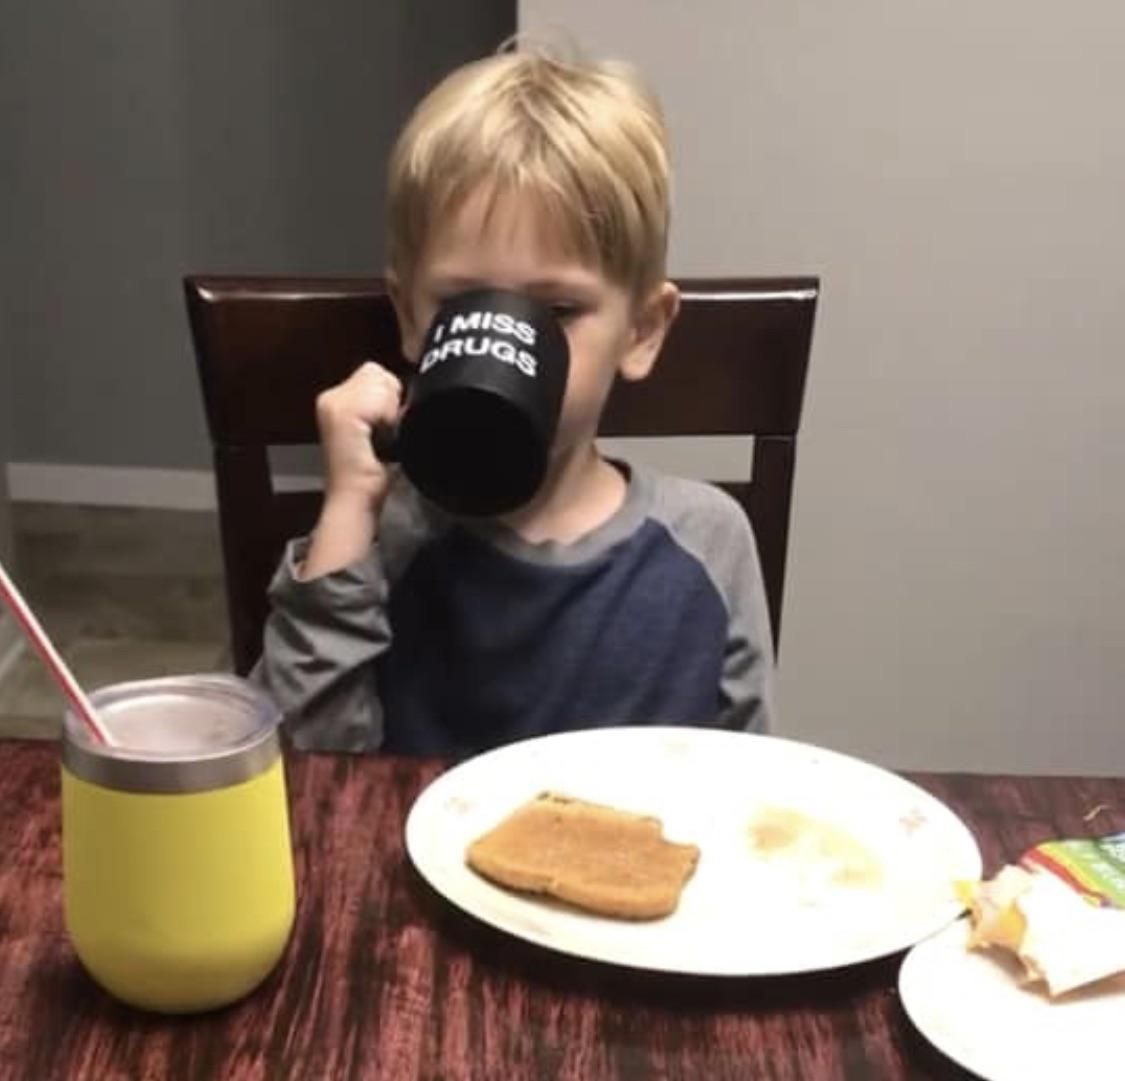 My friend’s kid asked if he could use “Mommy’s mug” this morning